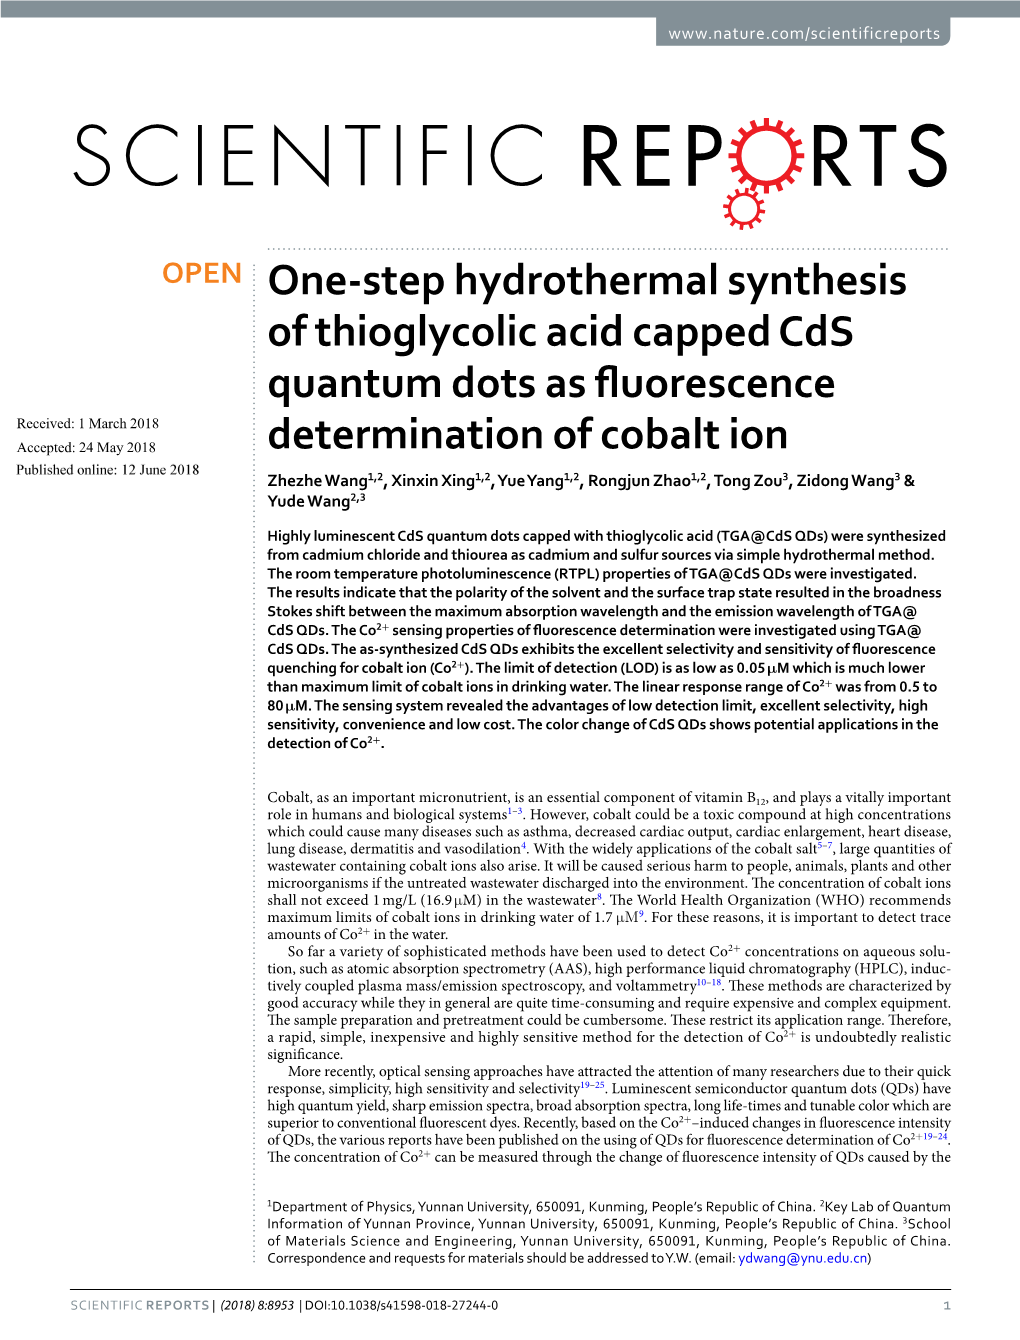 One-Step Hydrothermal Synthesis of Thioglycolic Acid Capped Cds